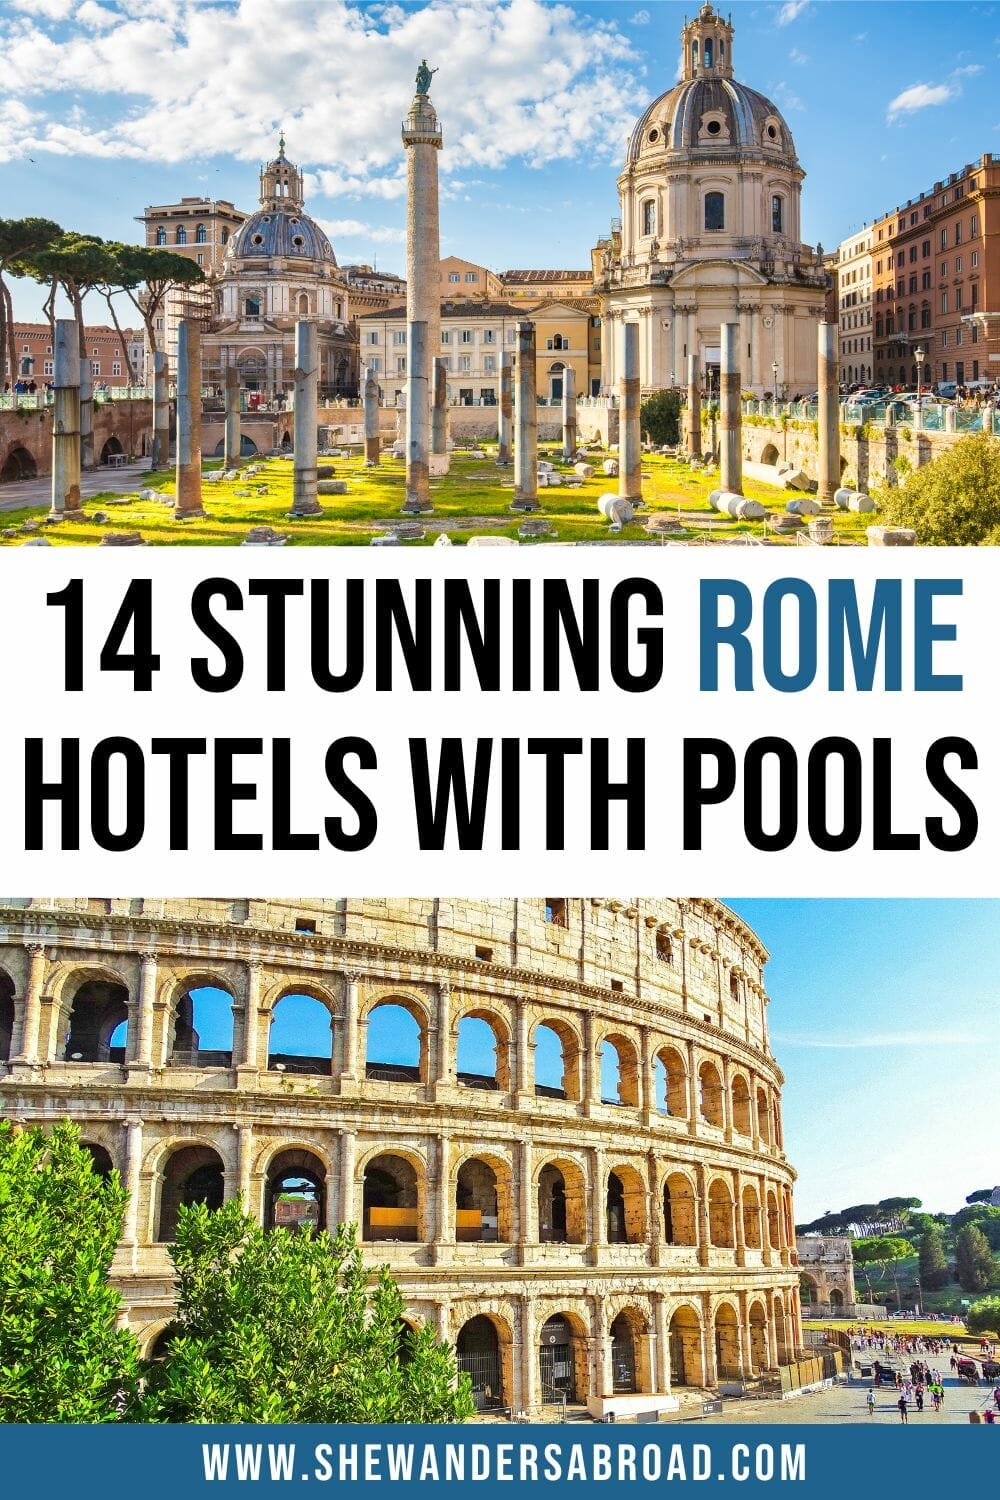 14 Stunning Rome Hotels with Pools (Rooftop Pools, Private Hot Tubs & More)